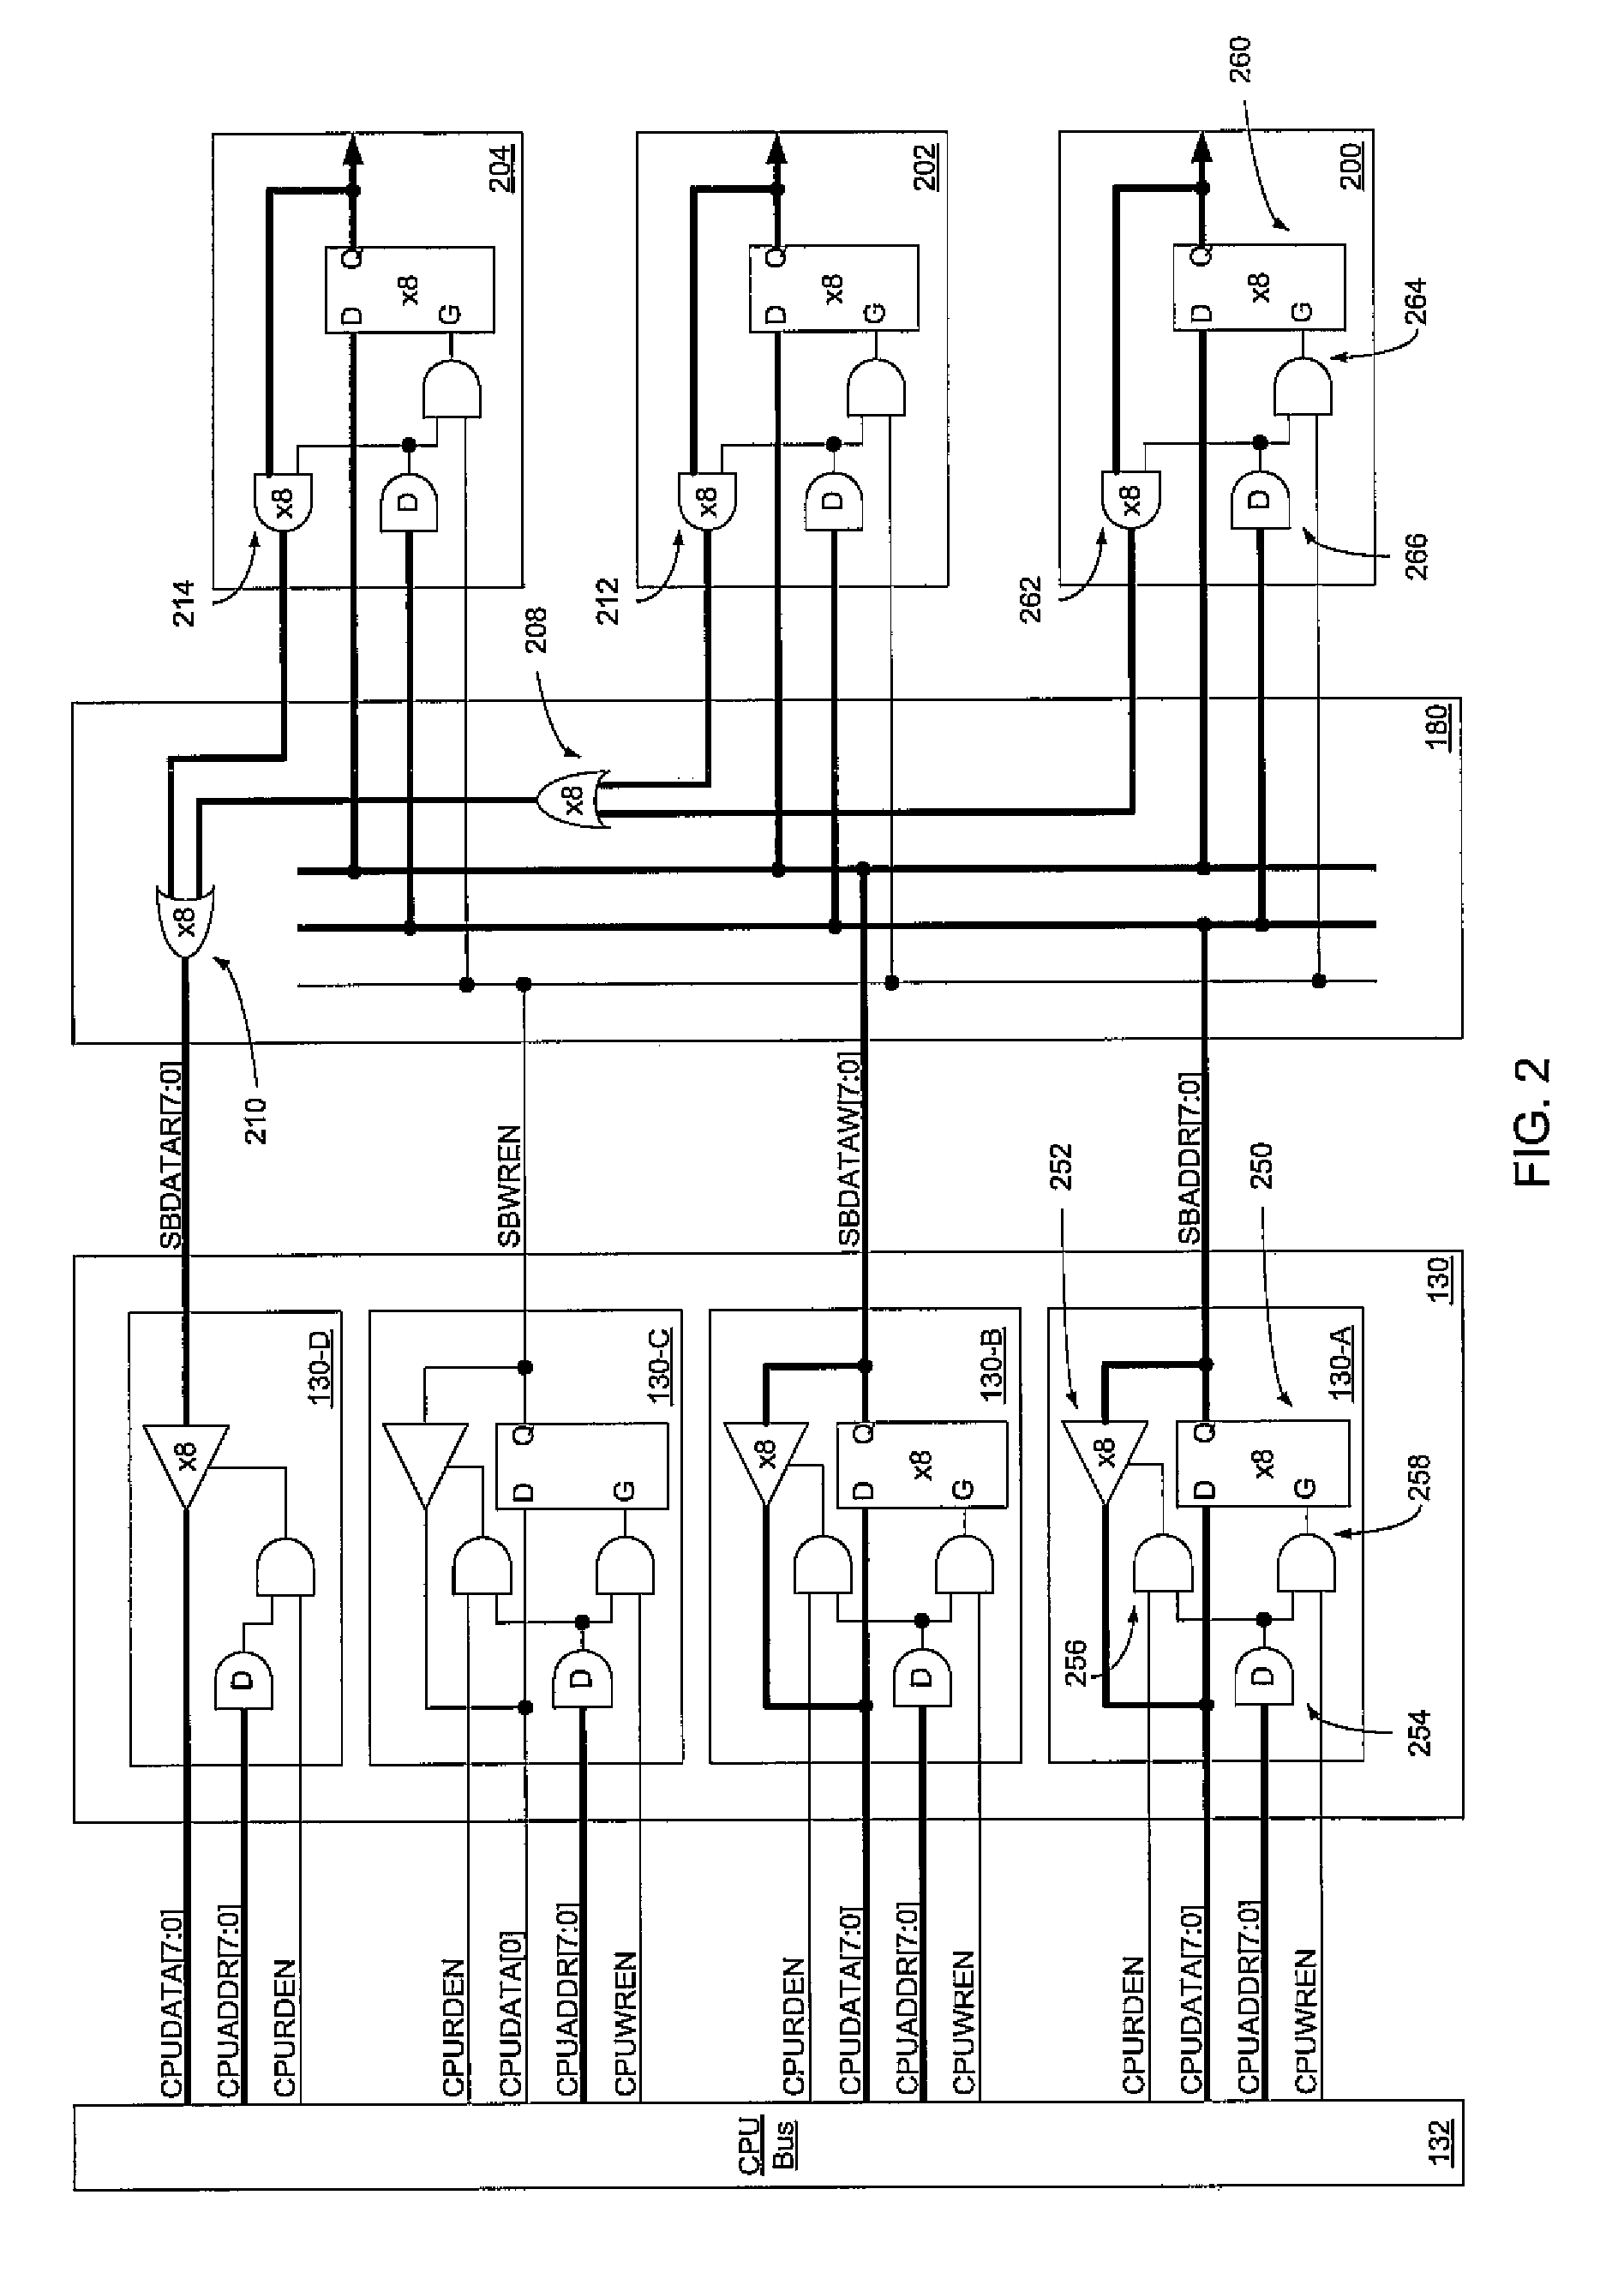 Programmable logic device with a microcontroller-based control system